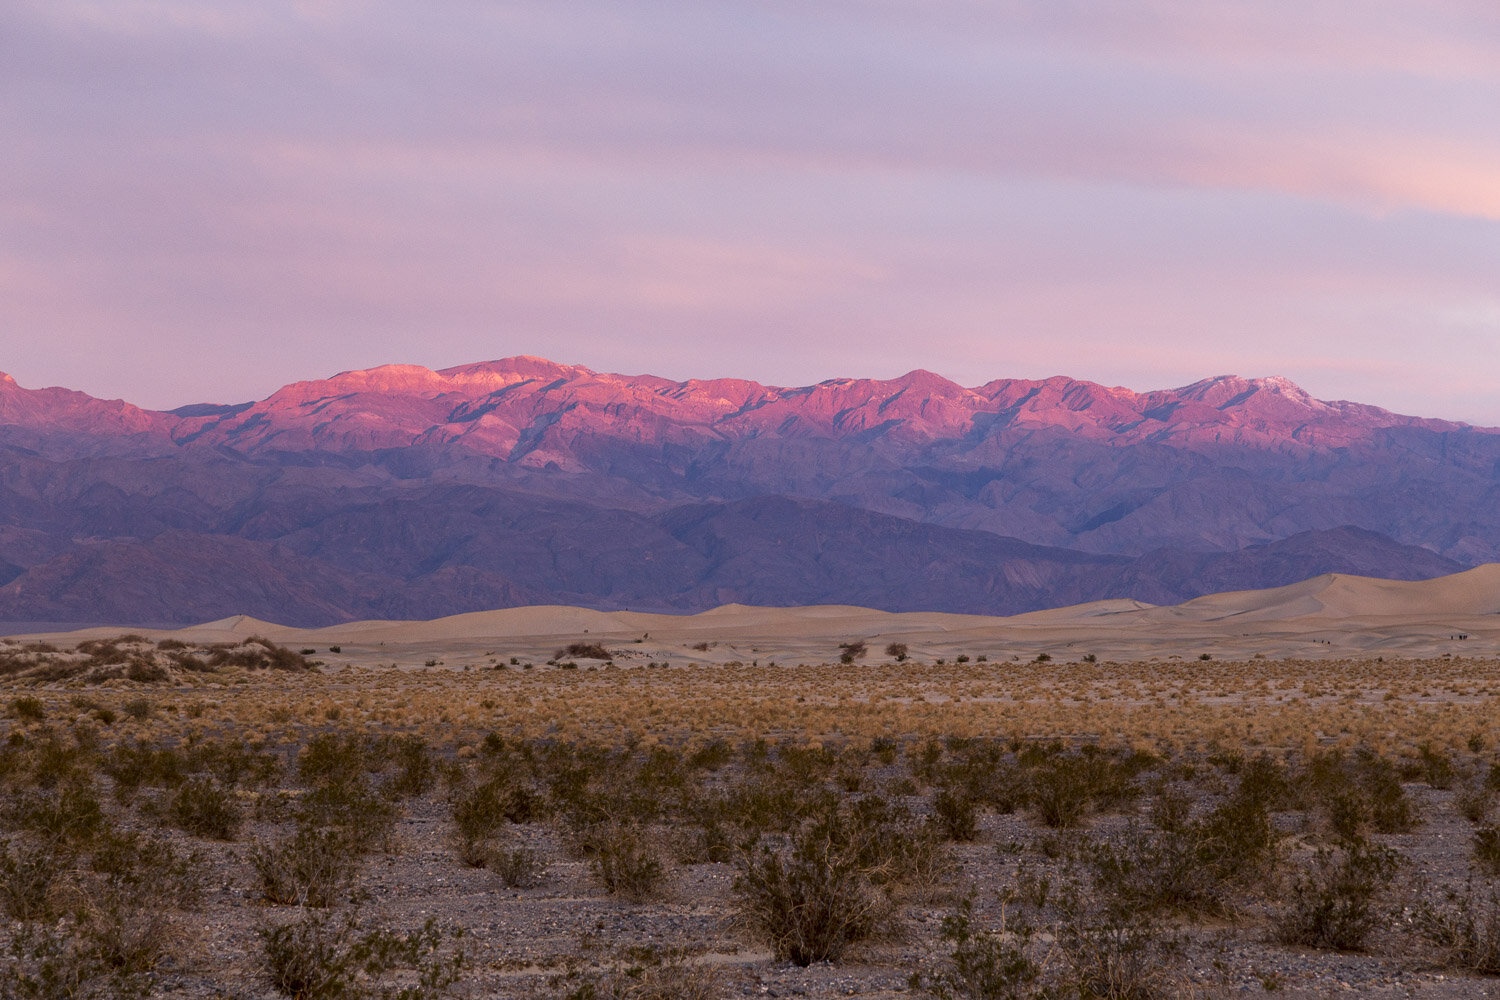 sunset_over_mountains_panamint_dunes_death_valley.jpg